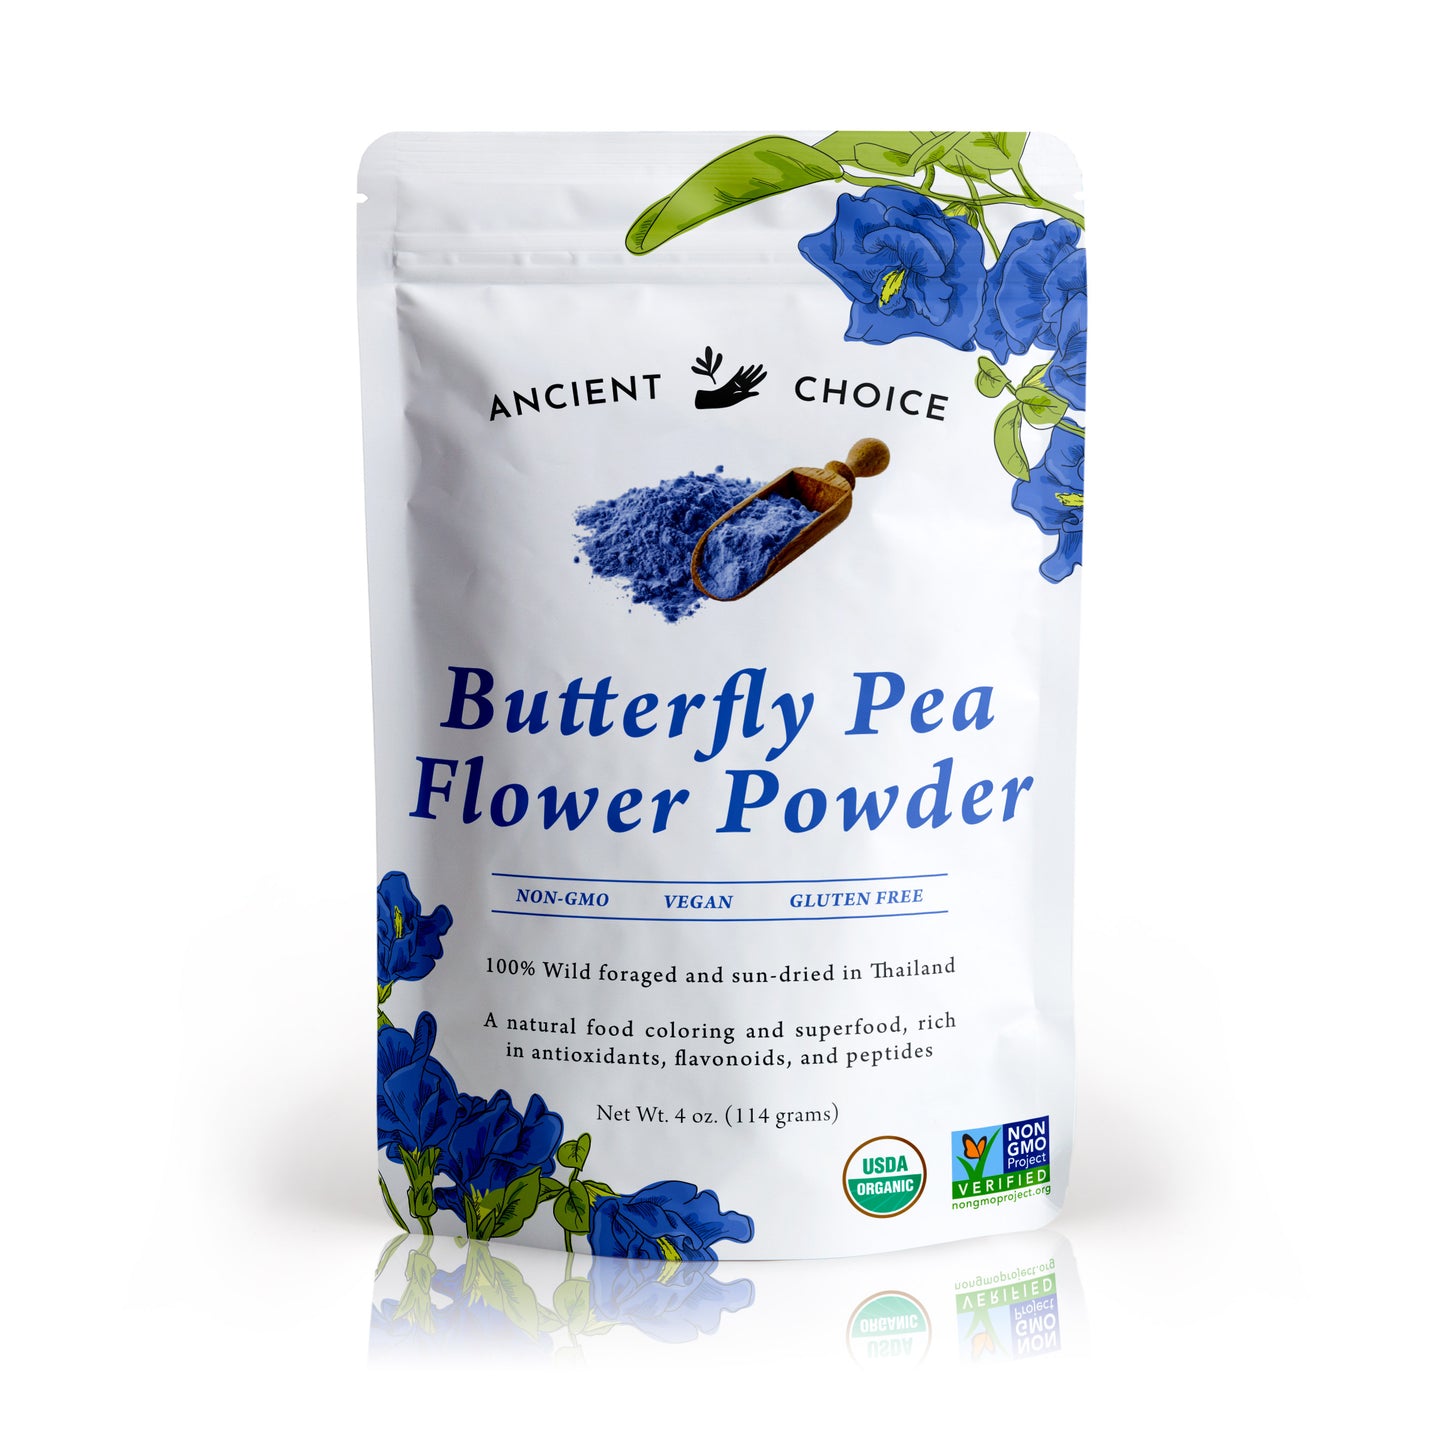 A bag of Ancient Choice Butterfly Pea Flower Powder, organic and non-gmo certified